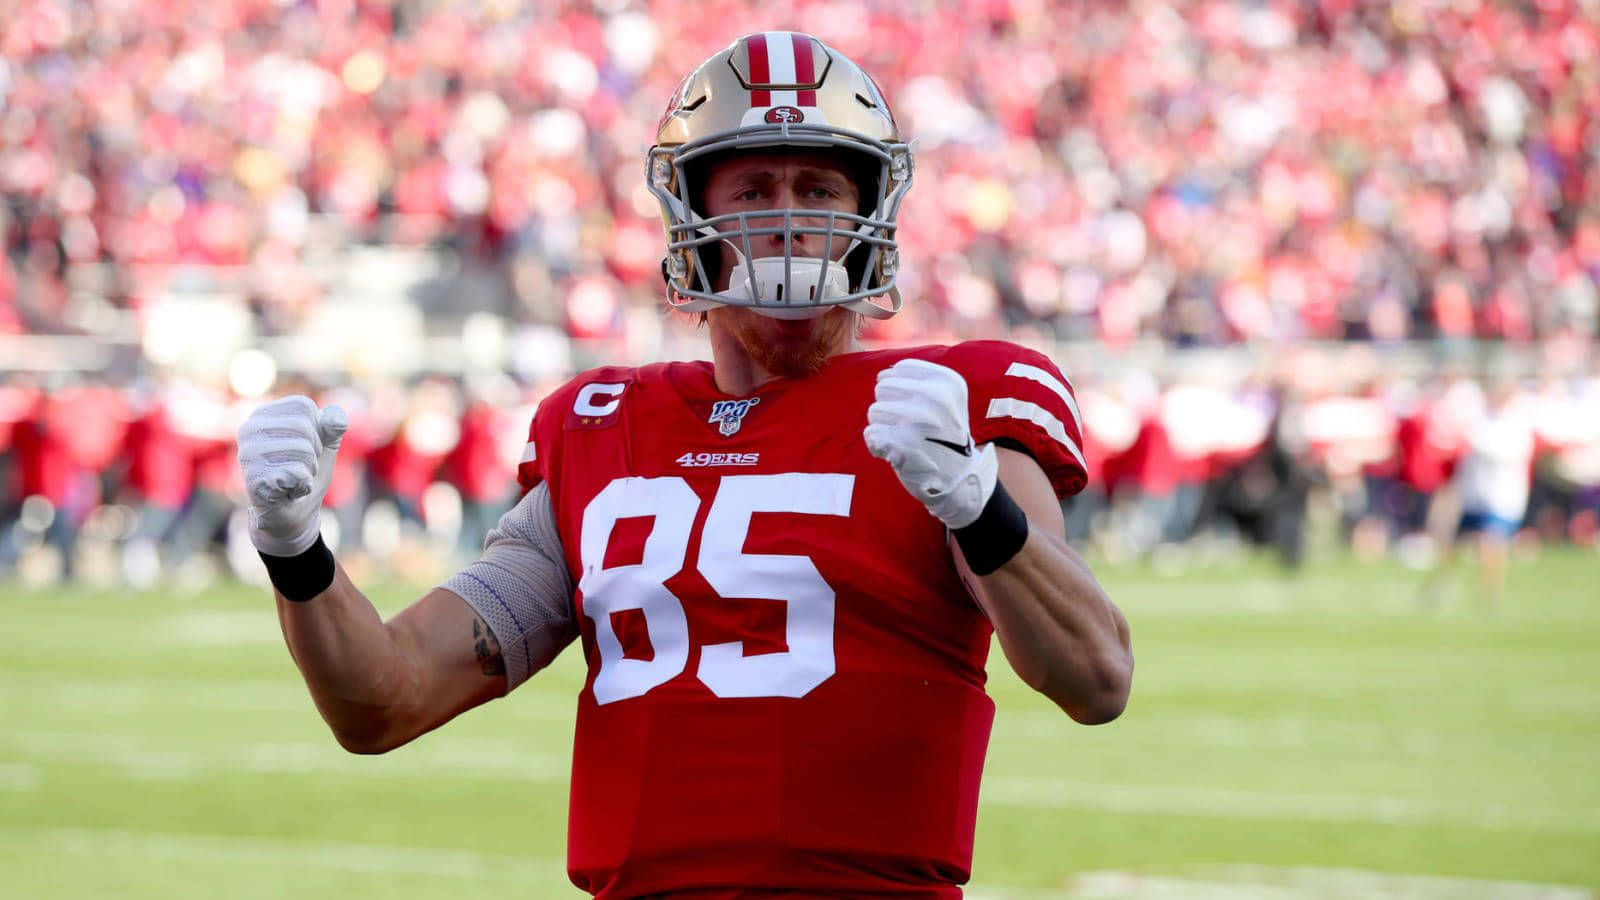 George Kittle Tight End for the San Francisco 49ers has a Hobbes tattoo  on his hand  rcalvinandhobbes